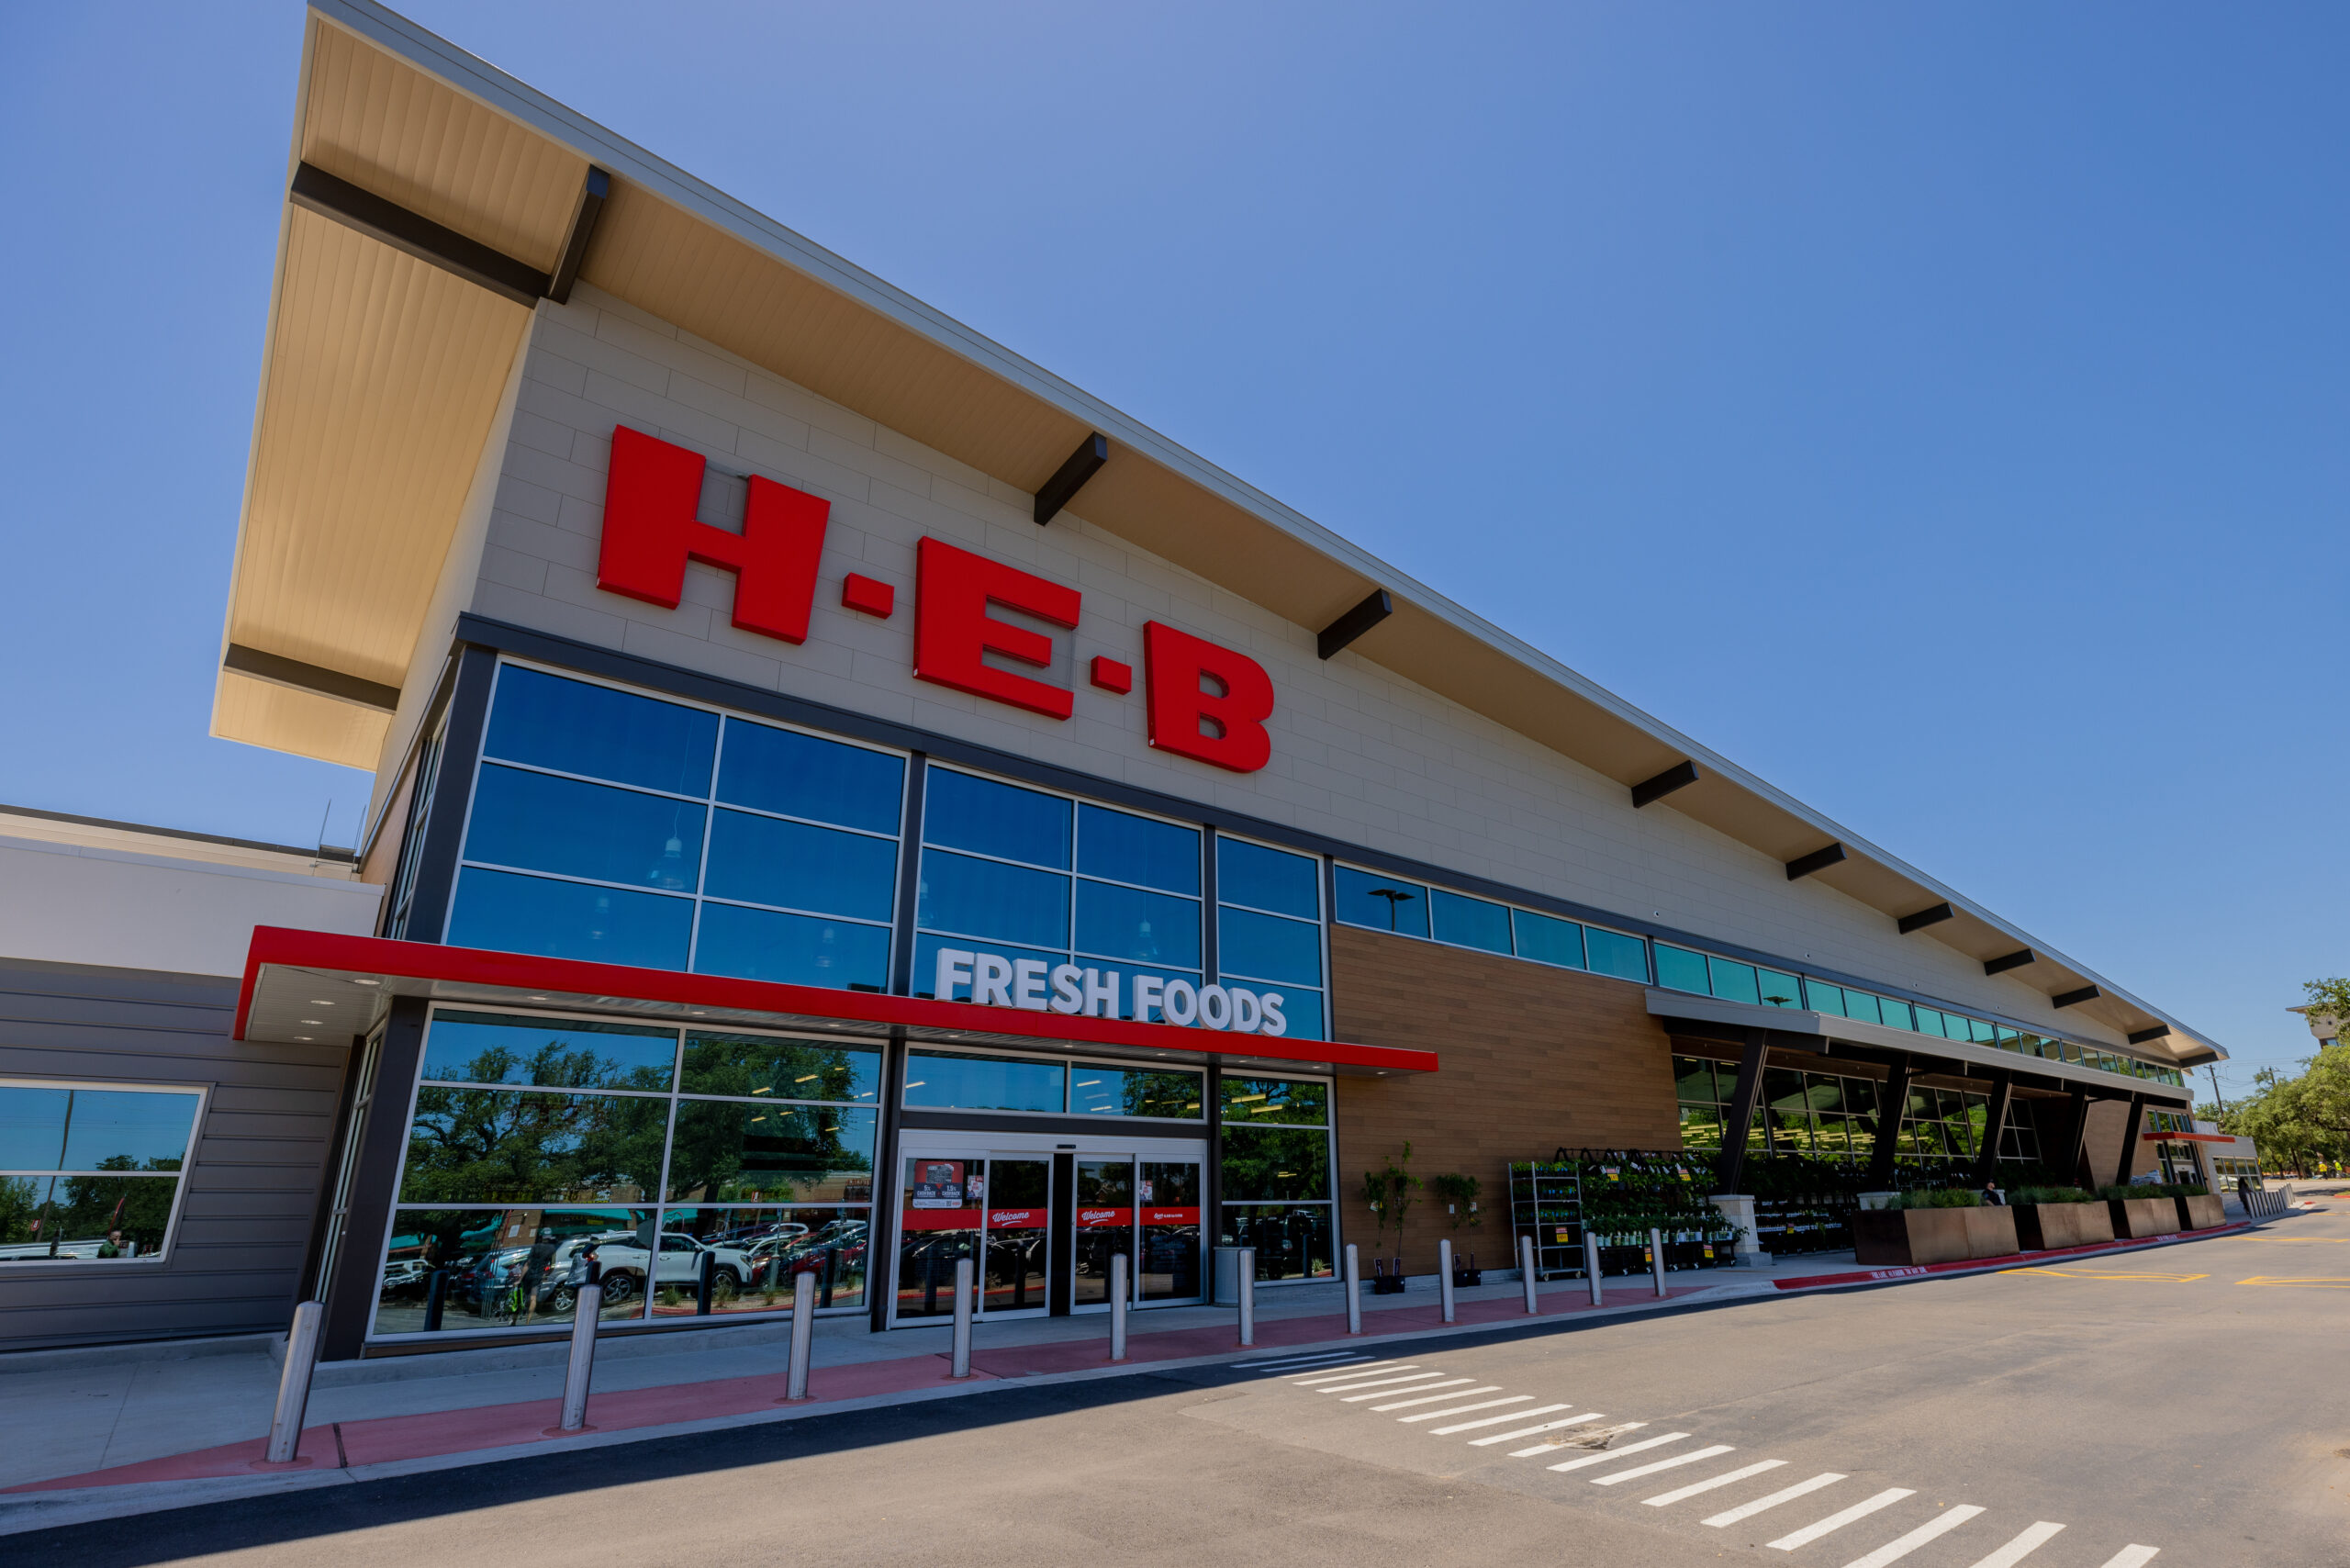 North Hills H‑E‑B in Austin introduces renovated store with new, upgraded  departments - H-E-B Newsroom